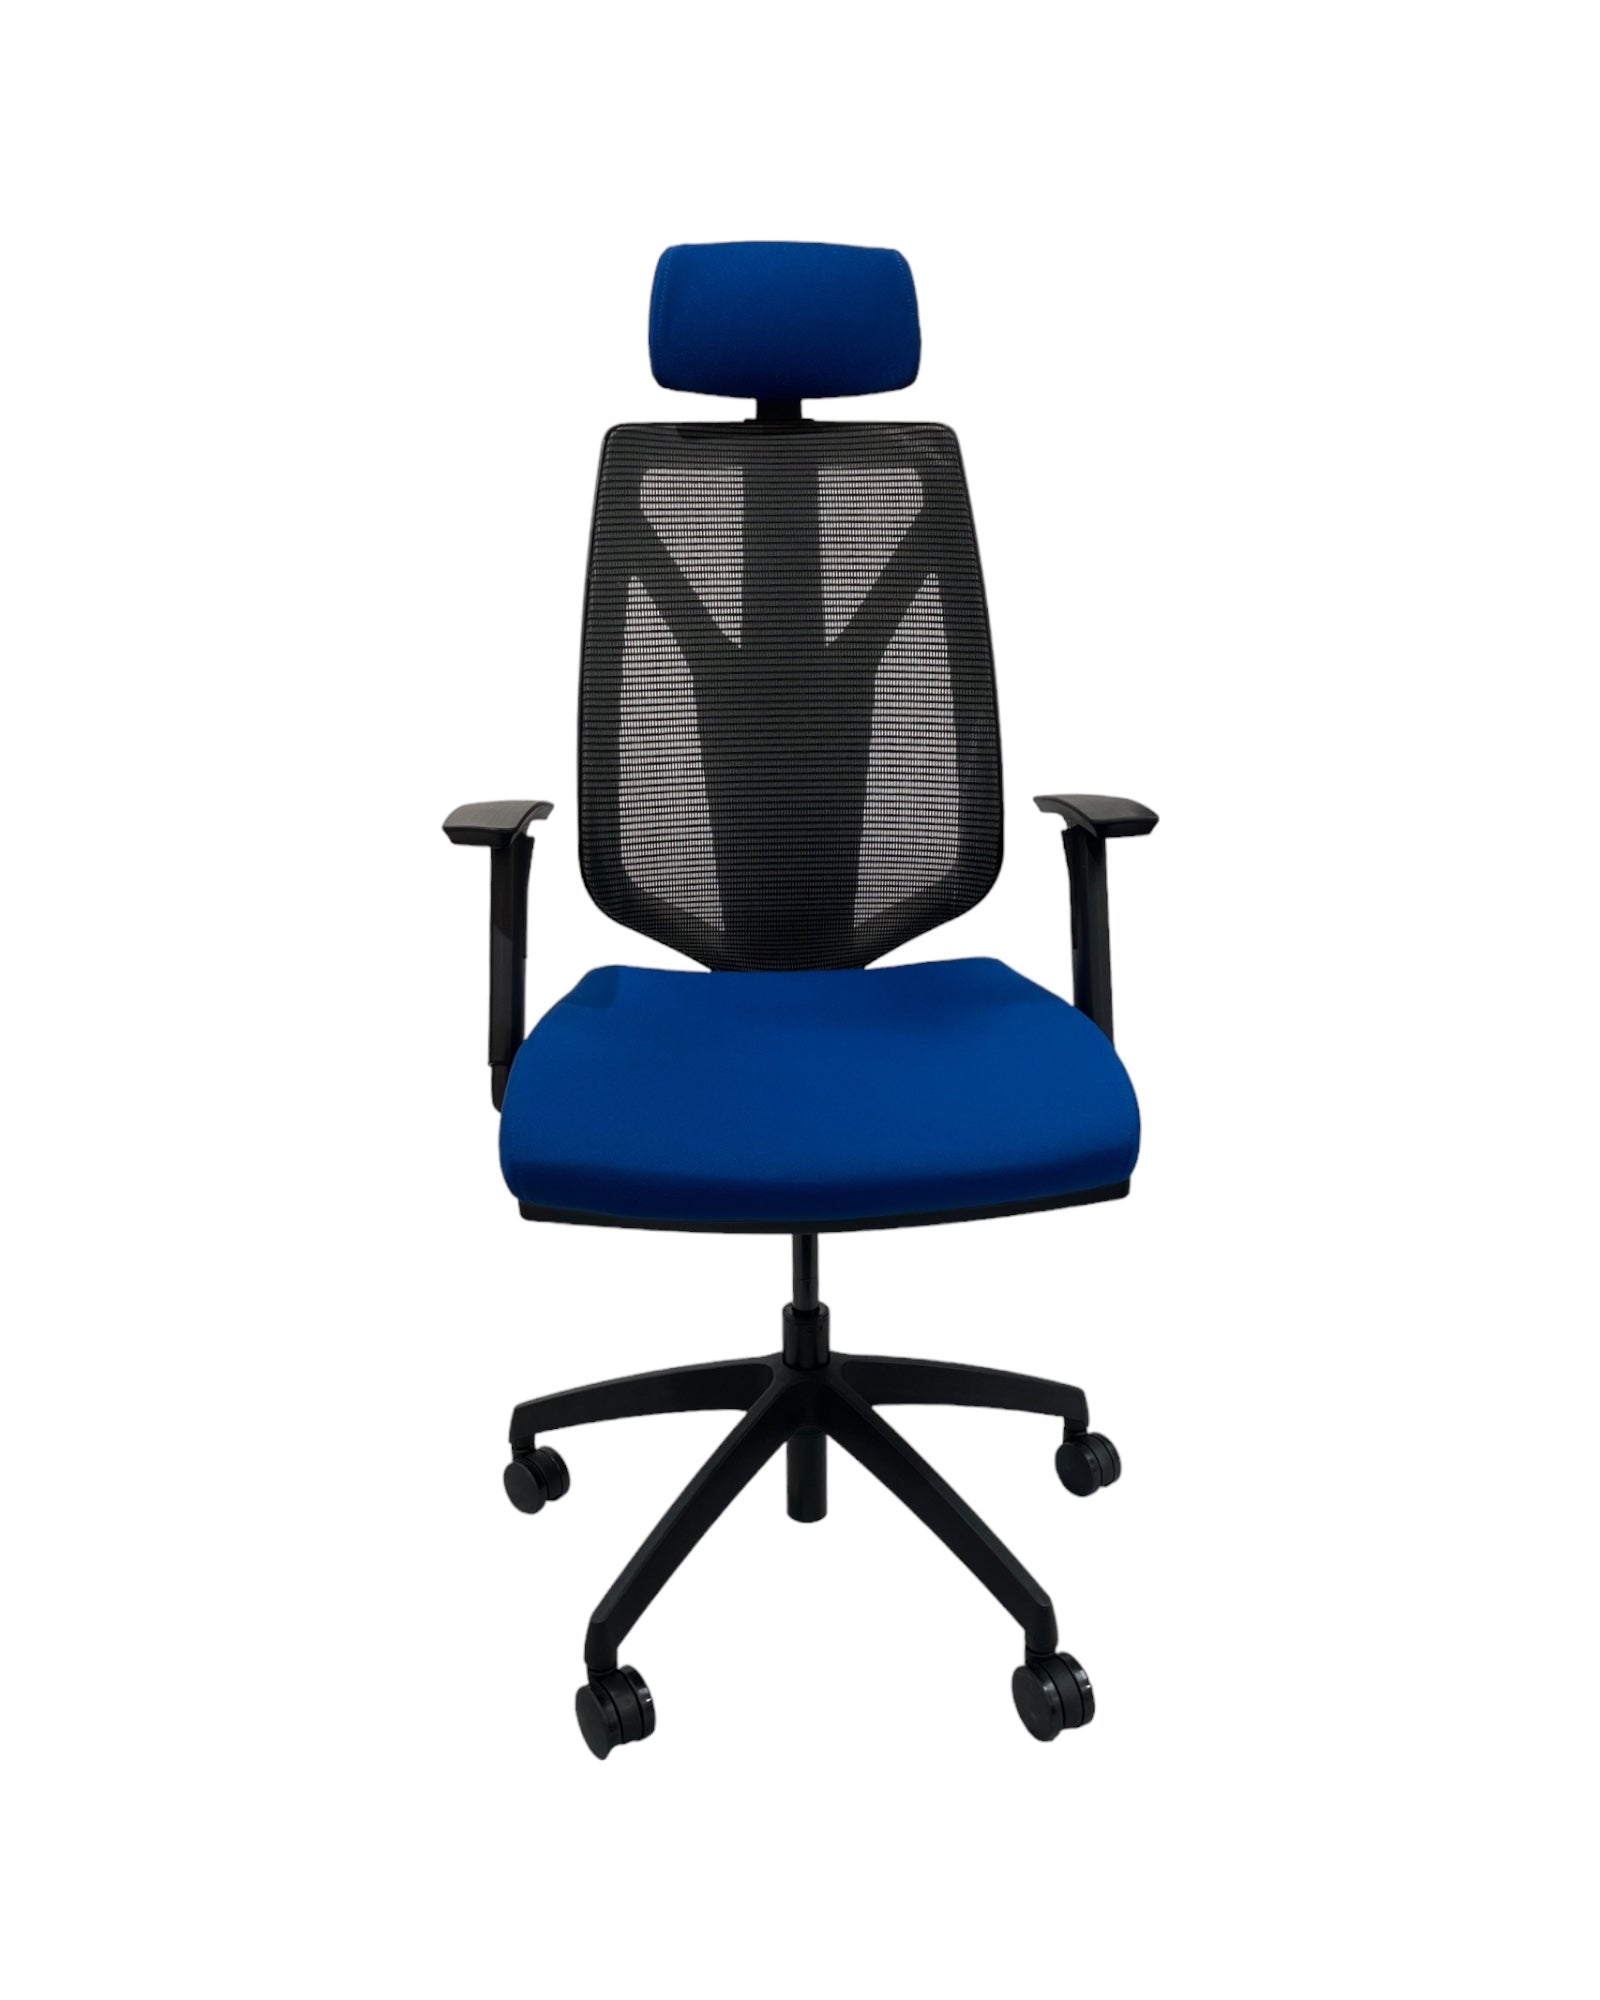 Mentor 1 mesh back chair with head rest